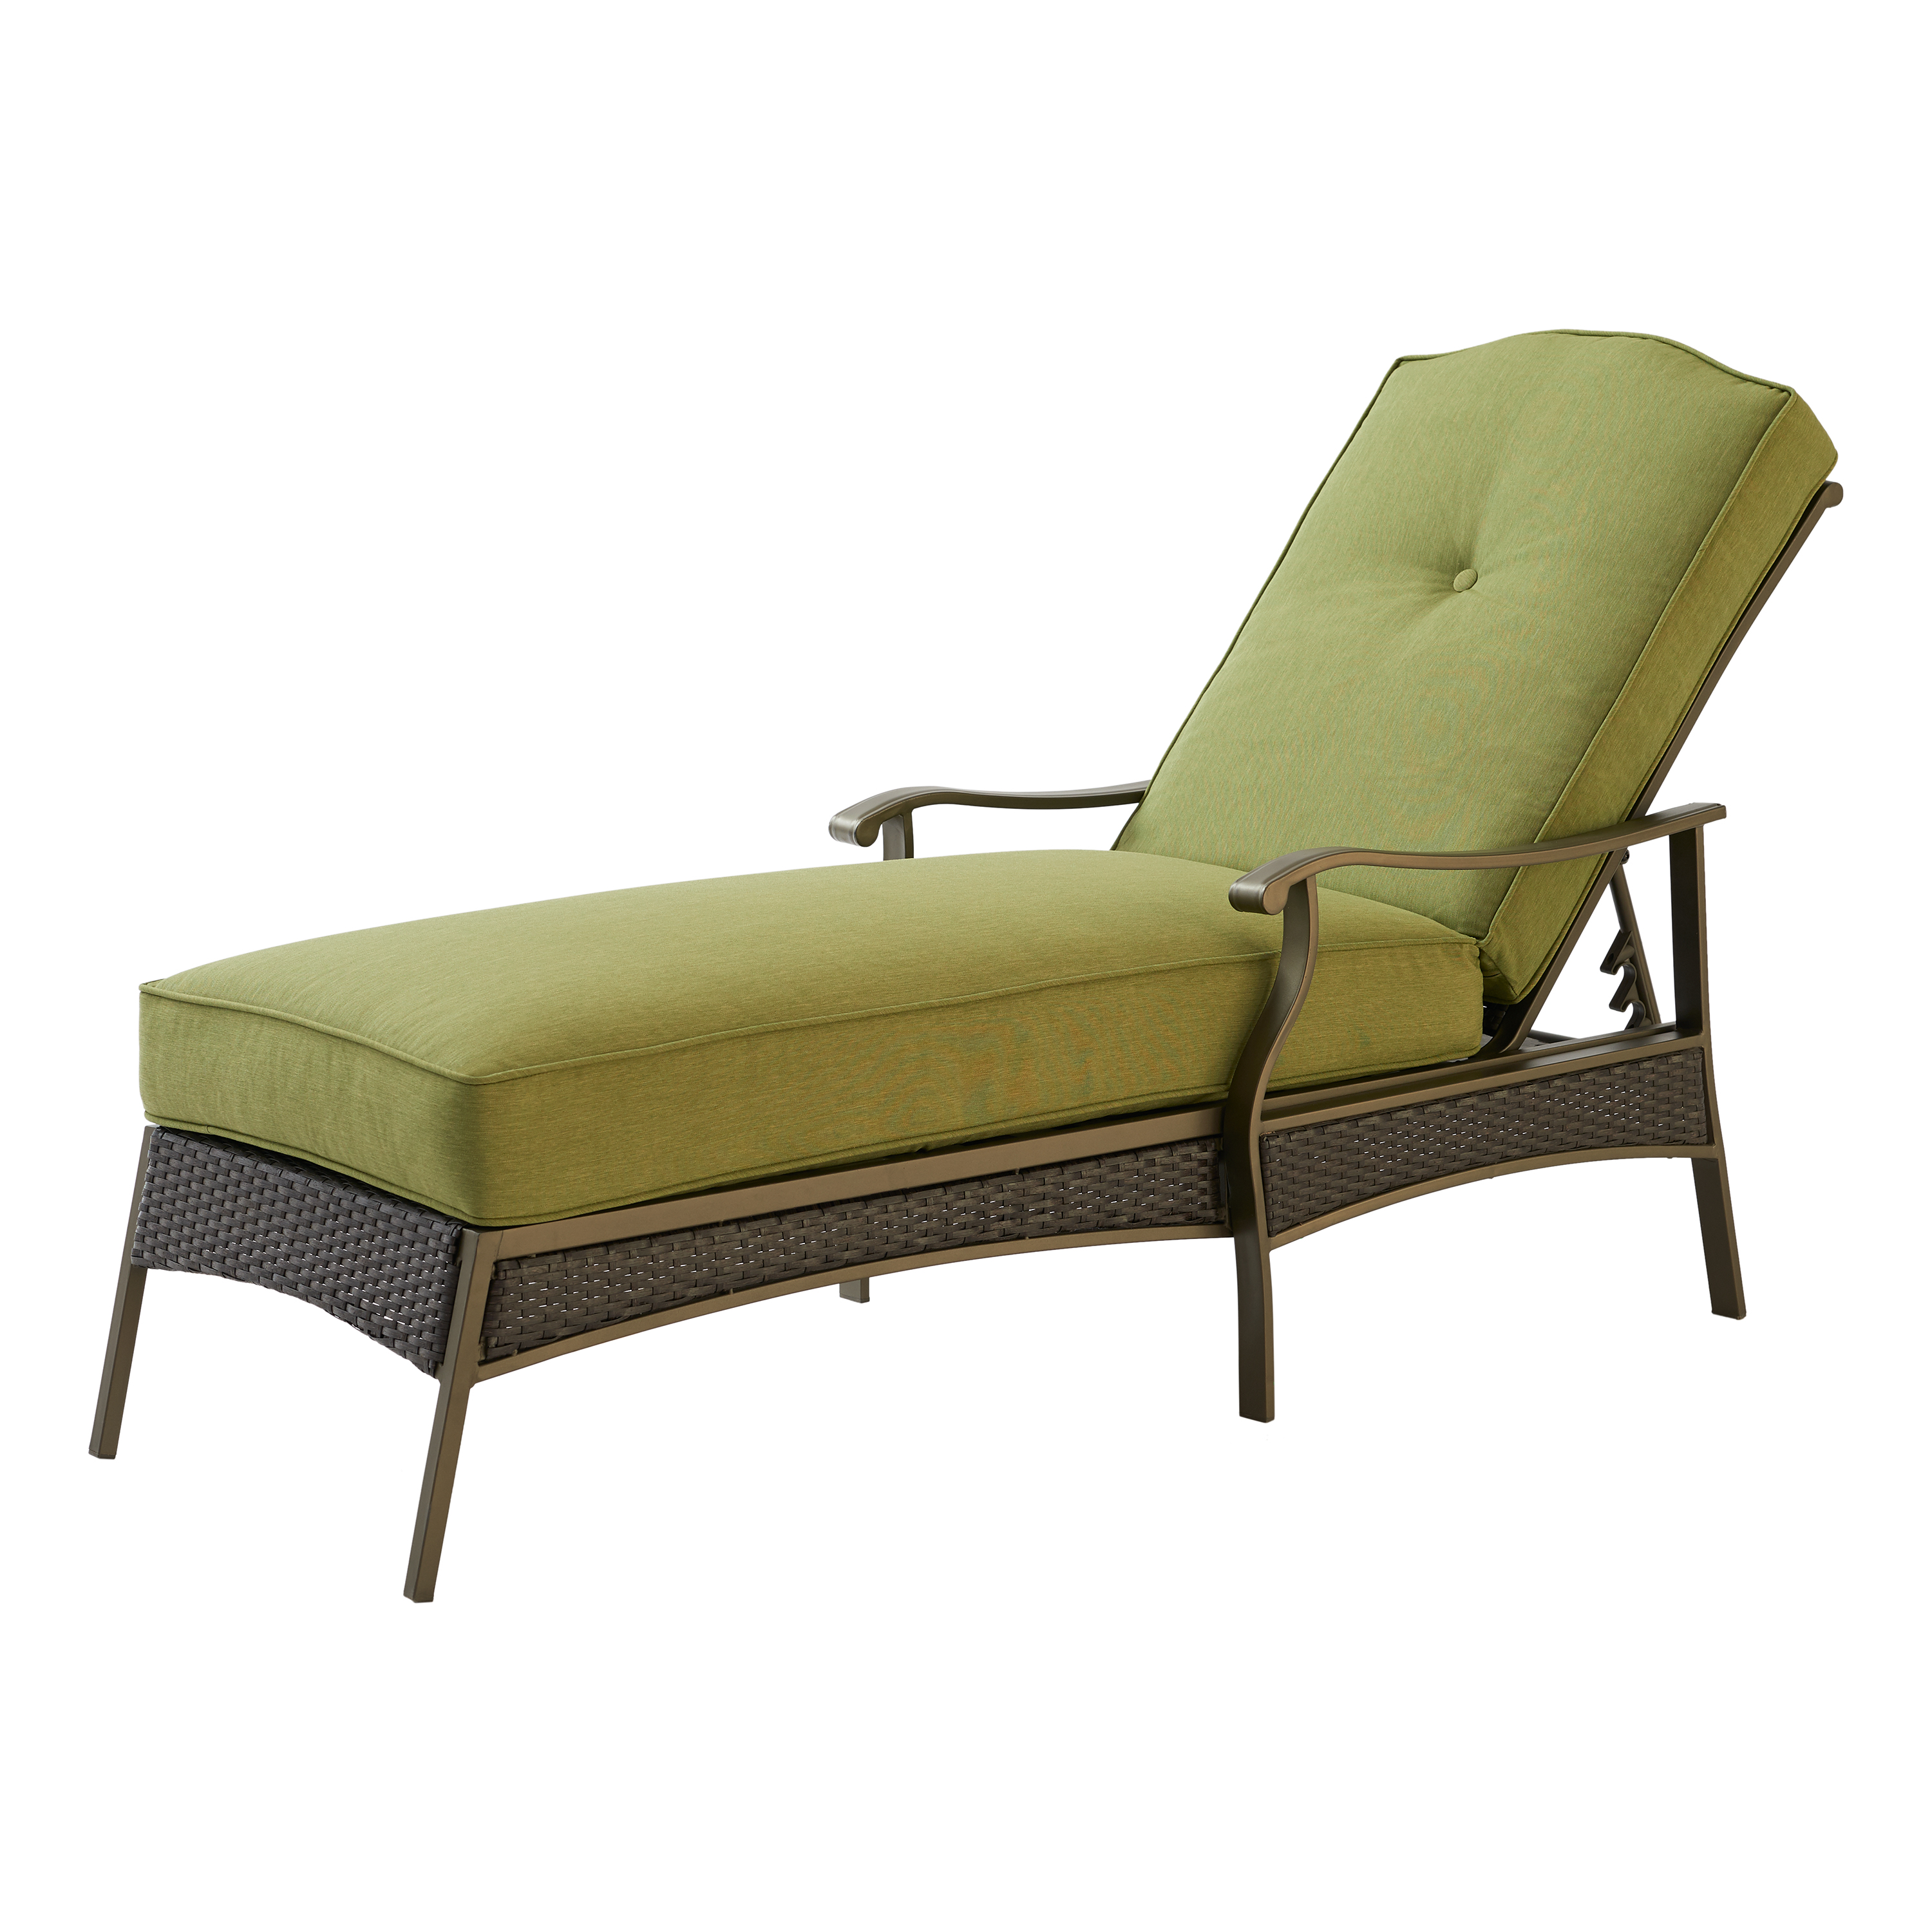 Better Homes & Gardens Providence Cushioned Wicker Outdoor Chaise Lounge - Green - image 3 of 13